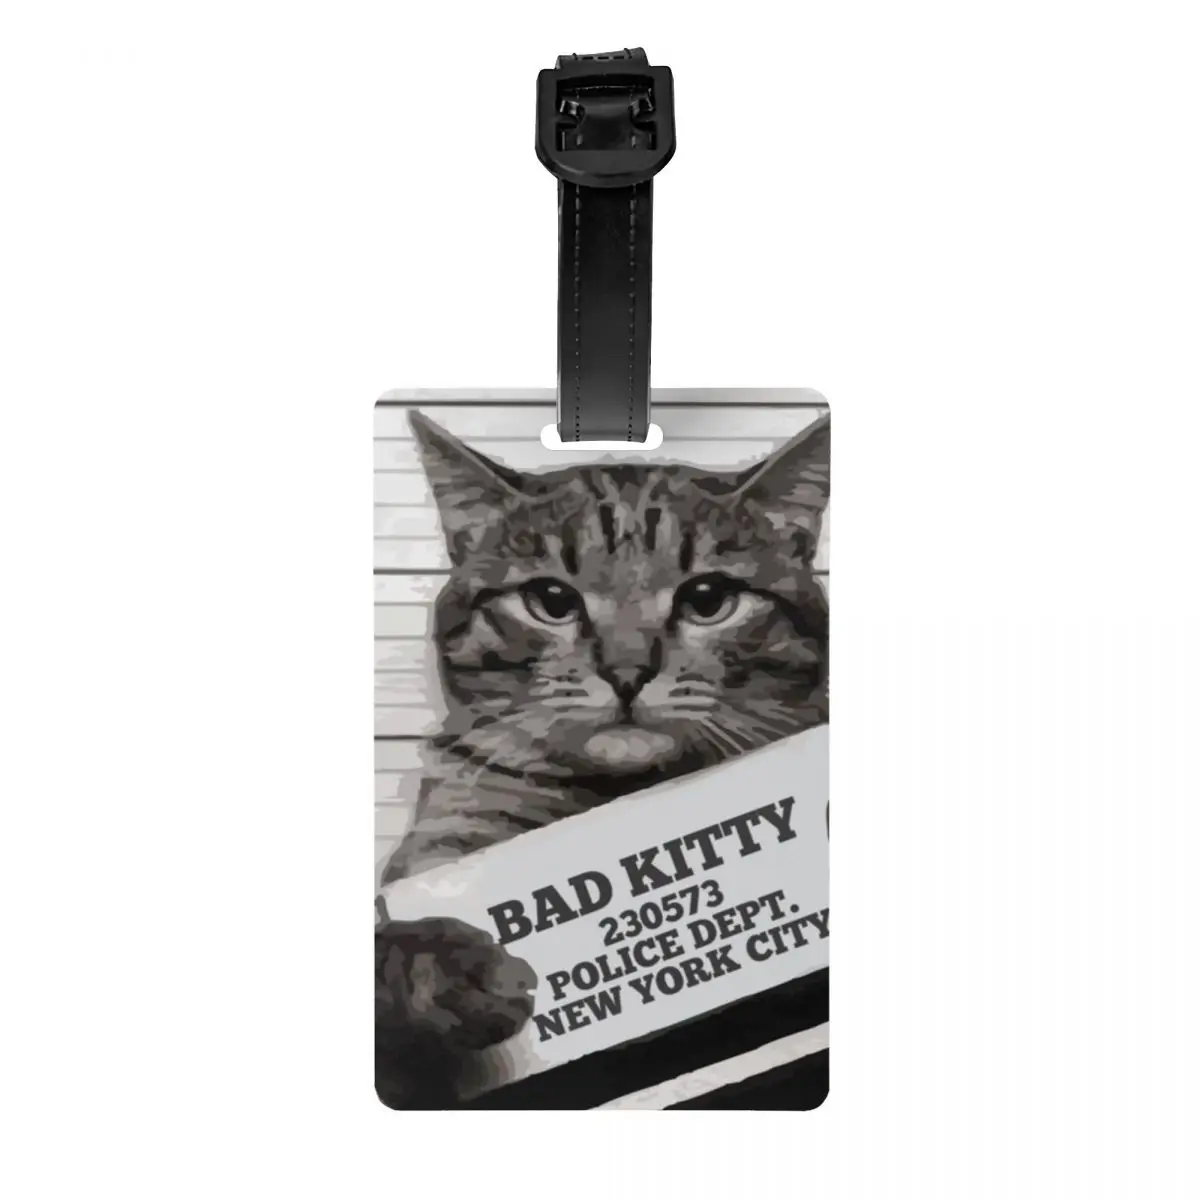 

Mugshot Cats Kitty Luggage Tag Suitcase PVC Travel Accessories Pet Kitten Love Meow Label Luggage Bag Case Tags Name ID Address